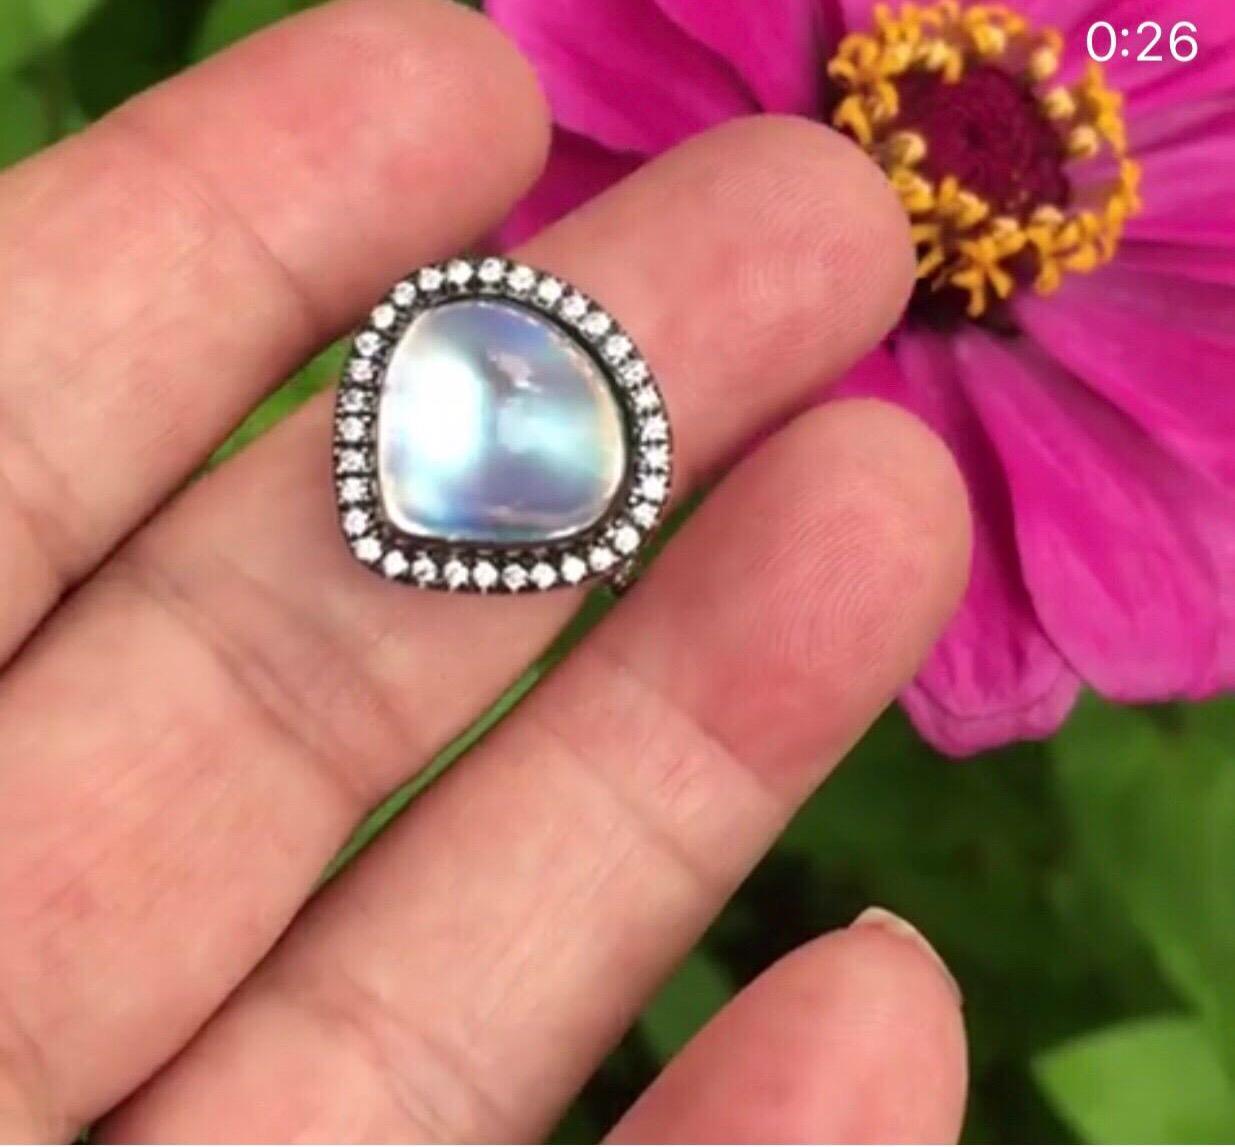 The Pear Shape Royal Blue Moonstone Is Set in 18 K White Gold, Accented By White Diamonds, Black Rhodium Plated. Stone Origin is India, Where the Best Blue Moonstones Are Minded, The  Gem  Displays The  Strong Blue Primary  Color Additionally   Also